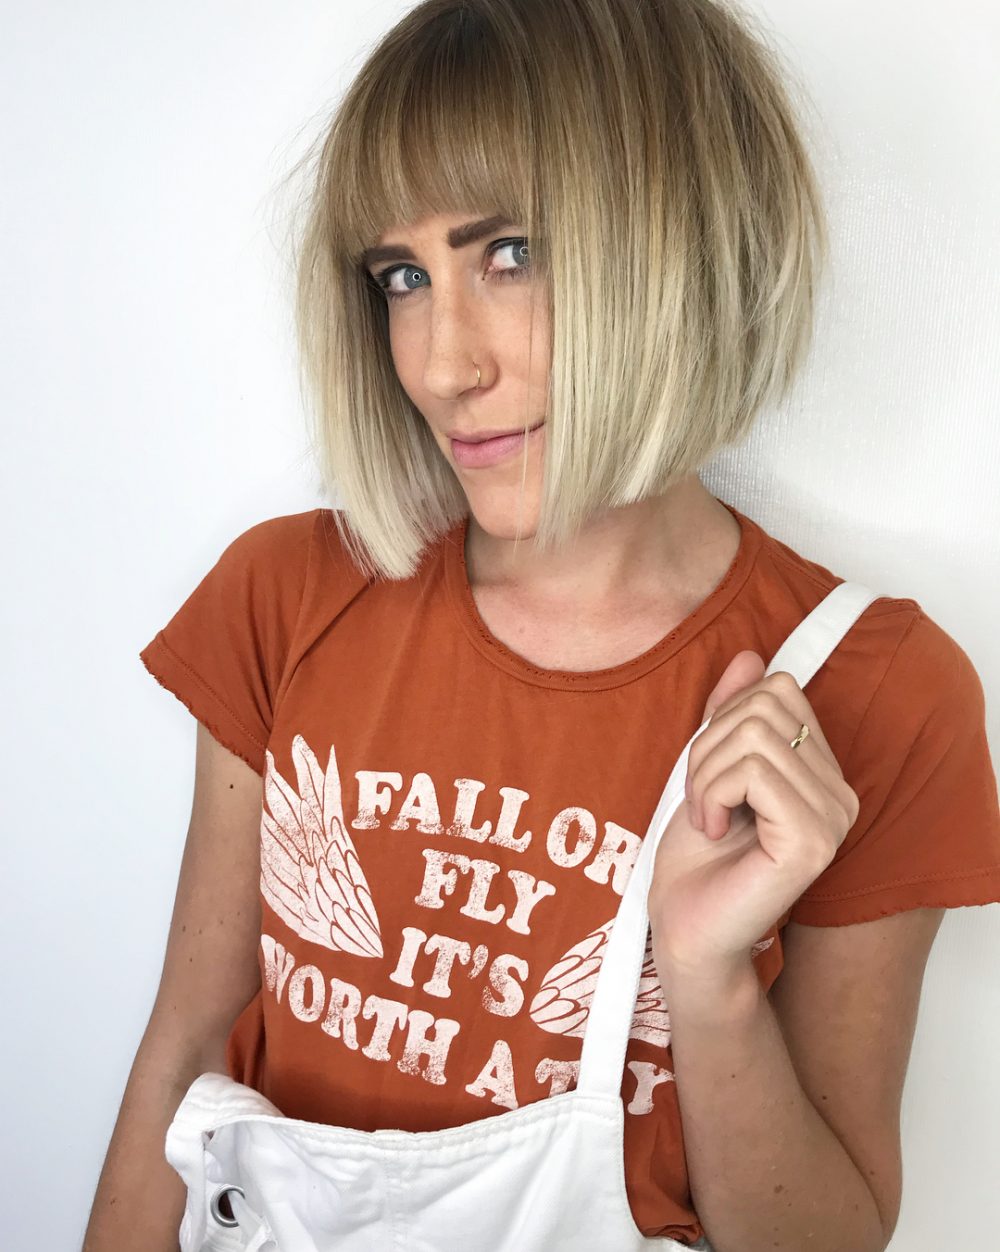 Textured Blunt Bob hairstyle for a longer face